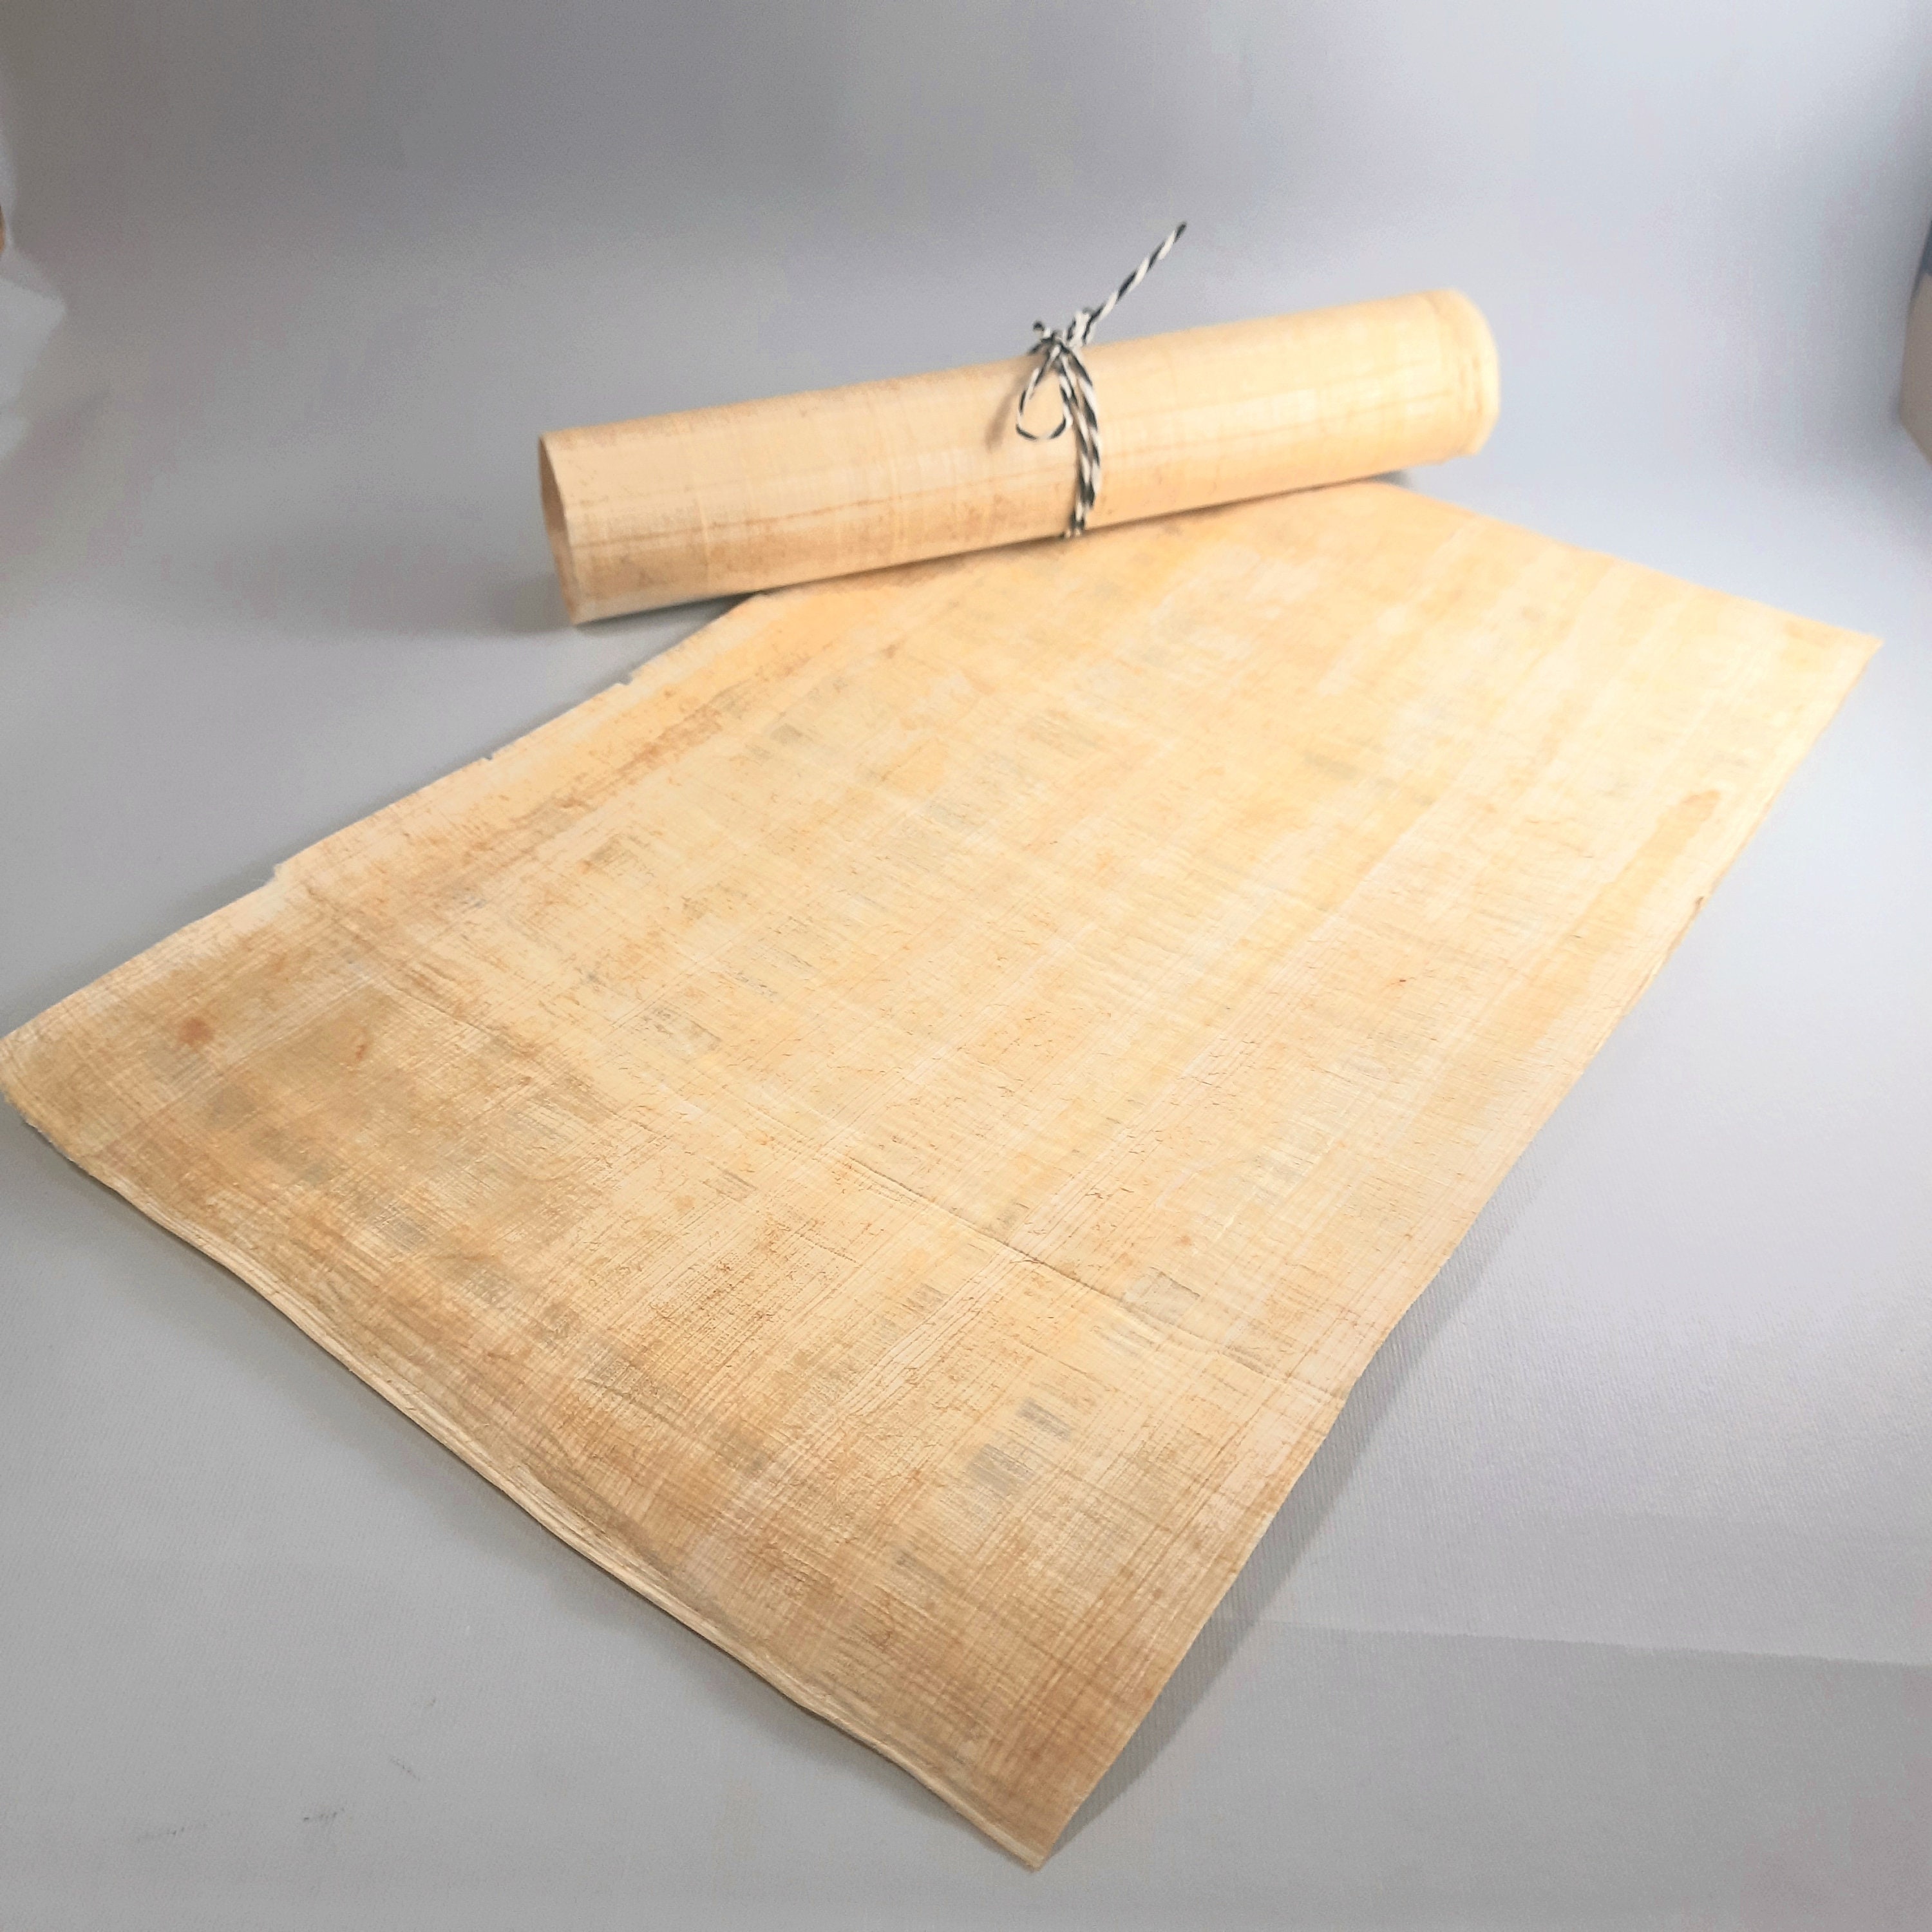 A1) 37x25 Handmade Egyptian papyrus paper for sale 95x65 cm.